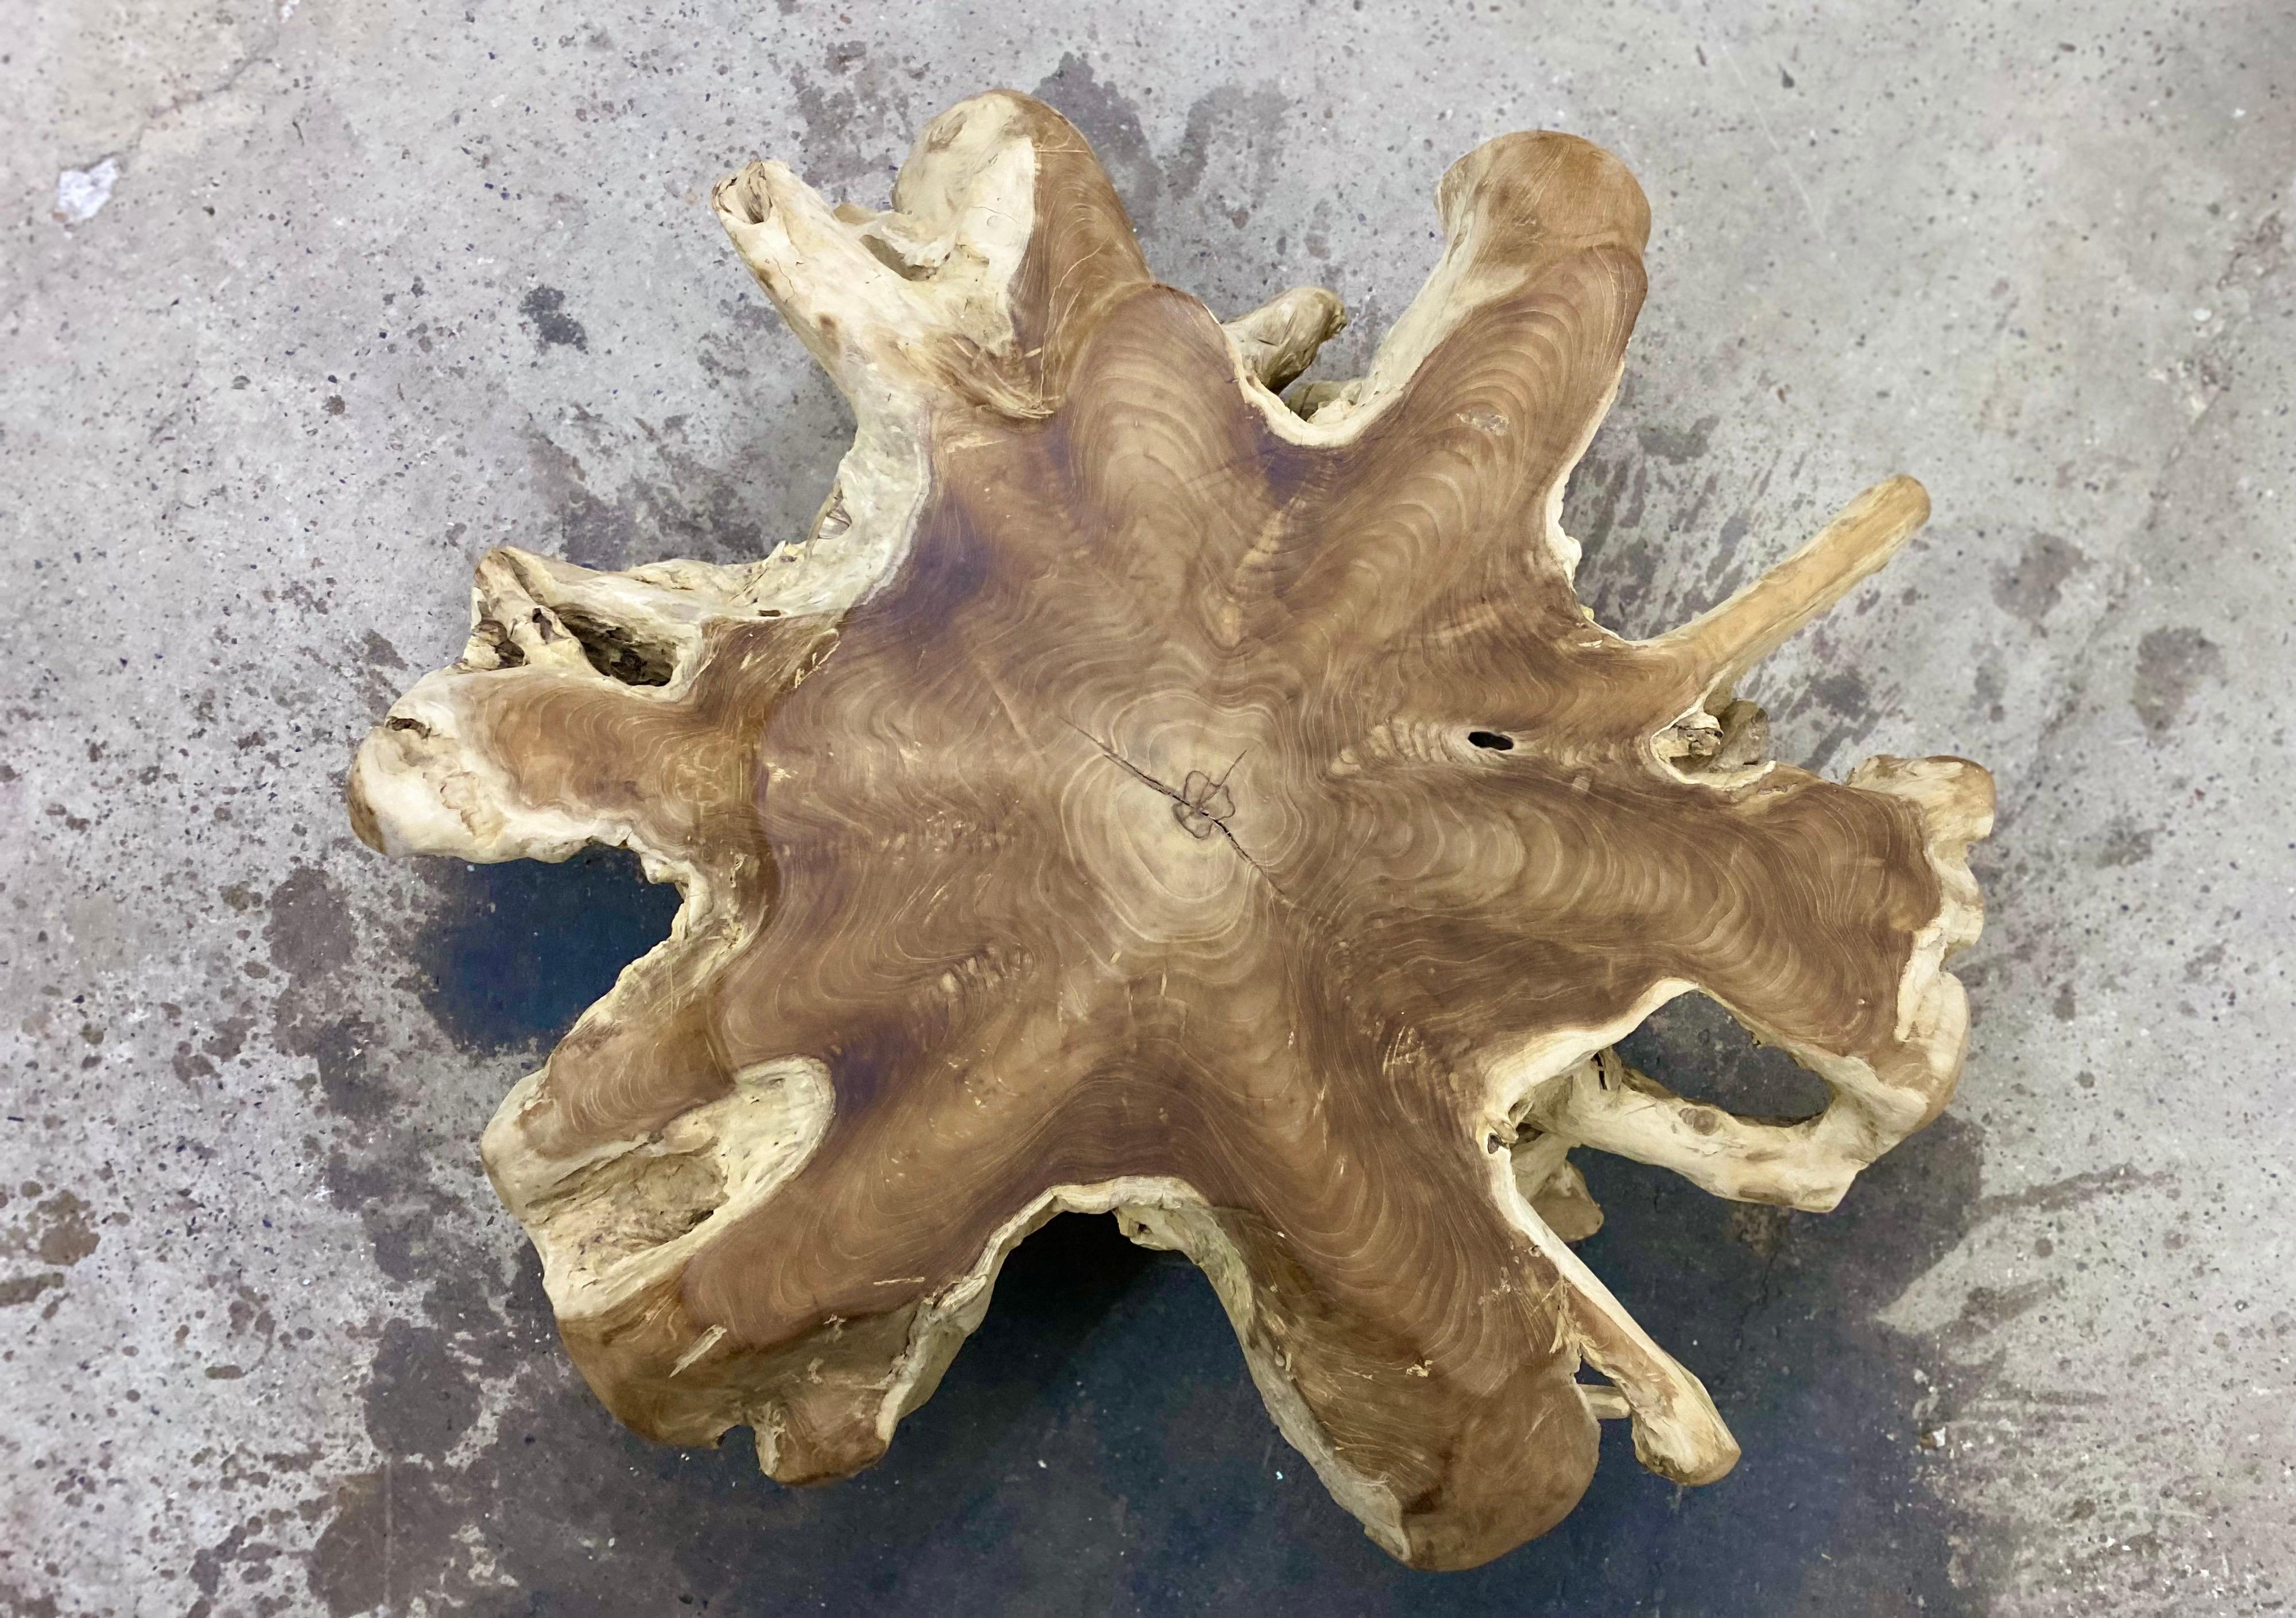 Stunning organic teak root coffee or sofa table artfully made out of one huge teak root. This brutalist root table is definitely an eye-catcher wether it´s used indoor or outdoors. The extraordinary shape is reminiscent of an octopus. A truley